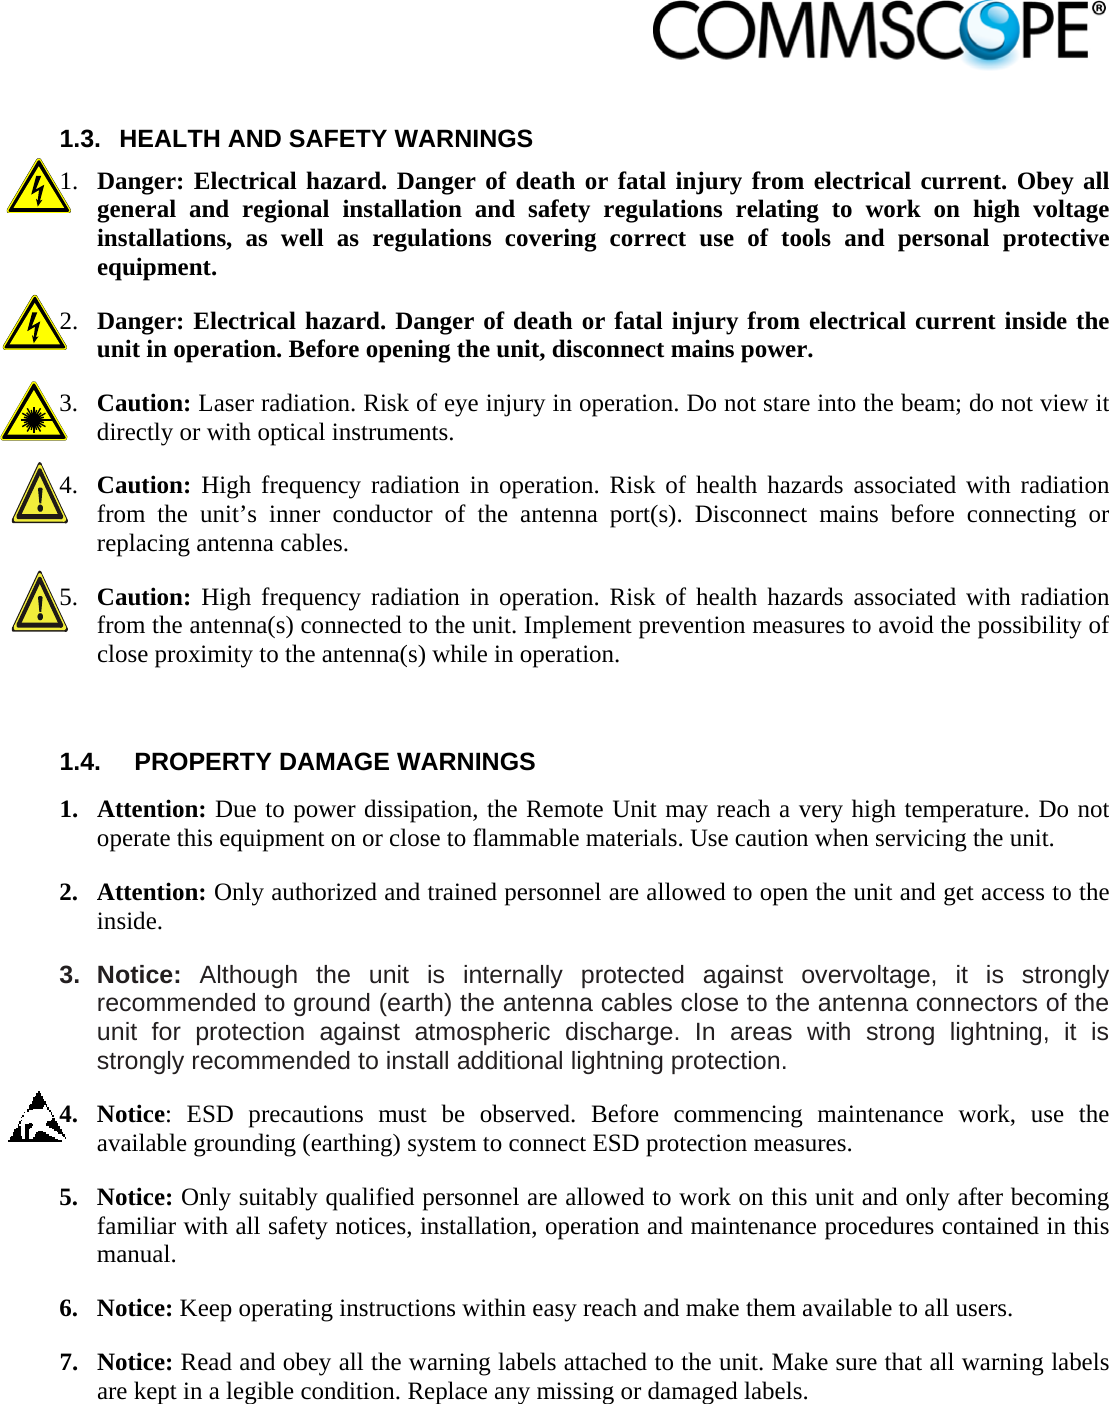                             1.3.  HEALTH AND SAFETY WARNINGS 1. Danger: Electrical hazard. Danger of death or fatal injury from electrical current. Obey all general and regional installation and safety regulations relating to work on high voltage installations, as well as regulations covering correct use of tools and personal protective equipment. 2. Danger: Electrical hazard. Danger of death or fatal injury from electrical current inside the unit in operation. Before opening the unit, disconnect mains power. 3. Caution: Laser radiation. Risk of eye injury in operation. Do not stare into the beam; do not view it directly or with optical instruments. 4. Caution: High frequency radiation in operation. Risk of health hazards associated with radiation from the unit’s inner conductor of the antenna port(s). Disconnect mains before connecting or replacing antenna cables. 5. Caution: High frequency radiation in operation. Risk of health hazards associated with radiation from the antenna(s) connected to the unit. Implement prevention measures to avoid the possibility of close proximity to the antenna(s) while in operation.  1.4.  PROPERTY DAMAGE WARNINGS  1. Attention: Due to power dissipation, the Remote Unit may reach a very high temperature. Do not operate this equipment on or close to flammable materials. Use caution when servicing the unit. 2. Attention: Only authorized and trained personnel are allowed to open the unit and get access to the inside. 3. Notice: Although the unit is internally protected against overvoltage, it is strongly recommended to ground (earth) the antenna cables close to the antenna connectors of the unit for protection against atmospheric discharge. In areas with strong lightning, it is strongly recommended to install additional lightning protection. 4. Notice: ESD precautions must be observed. Before commencing maintenance work, use the available grounding (earthing) system to connect ESD protection measures. 5. Notice: Only suitably qualified personnel are allowed to work on this unit and only after becoming familiar with all safety notices, installation, operation and maintenance procedures contained in this manual. 6. Notice: Keep operating instructions within easy reach and make them available to all users. 7. Notice: Read and obey all the warning labels attached to the unit. Make sure that all warning labels are kept in a legible condition. Replace any missing or damaged labels. 